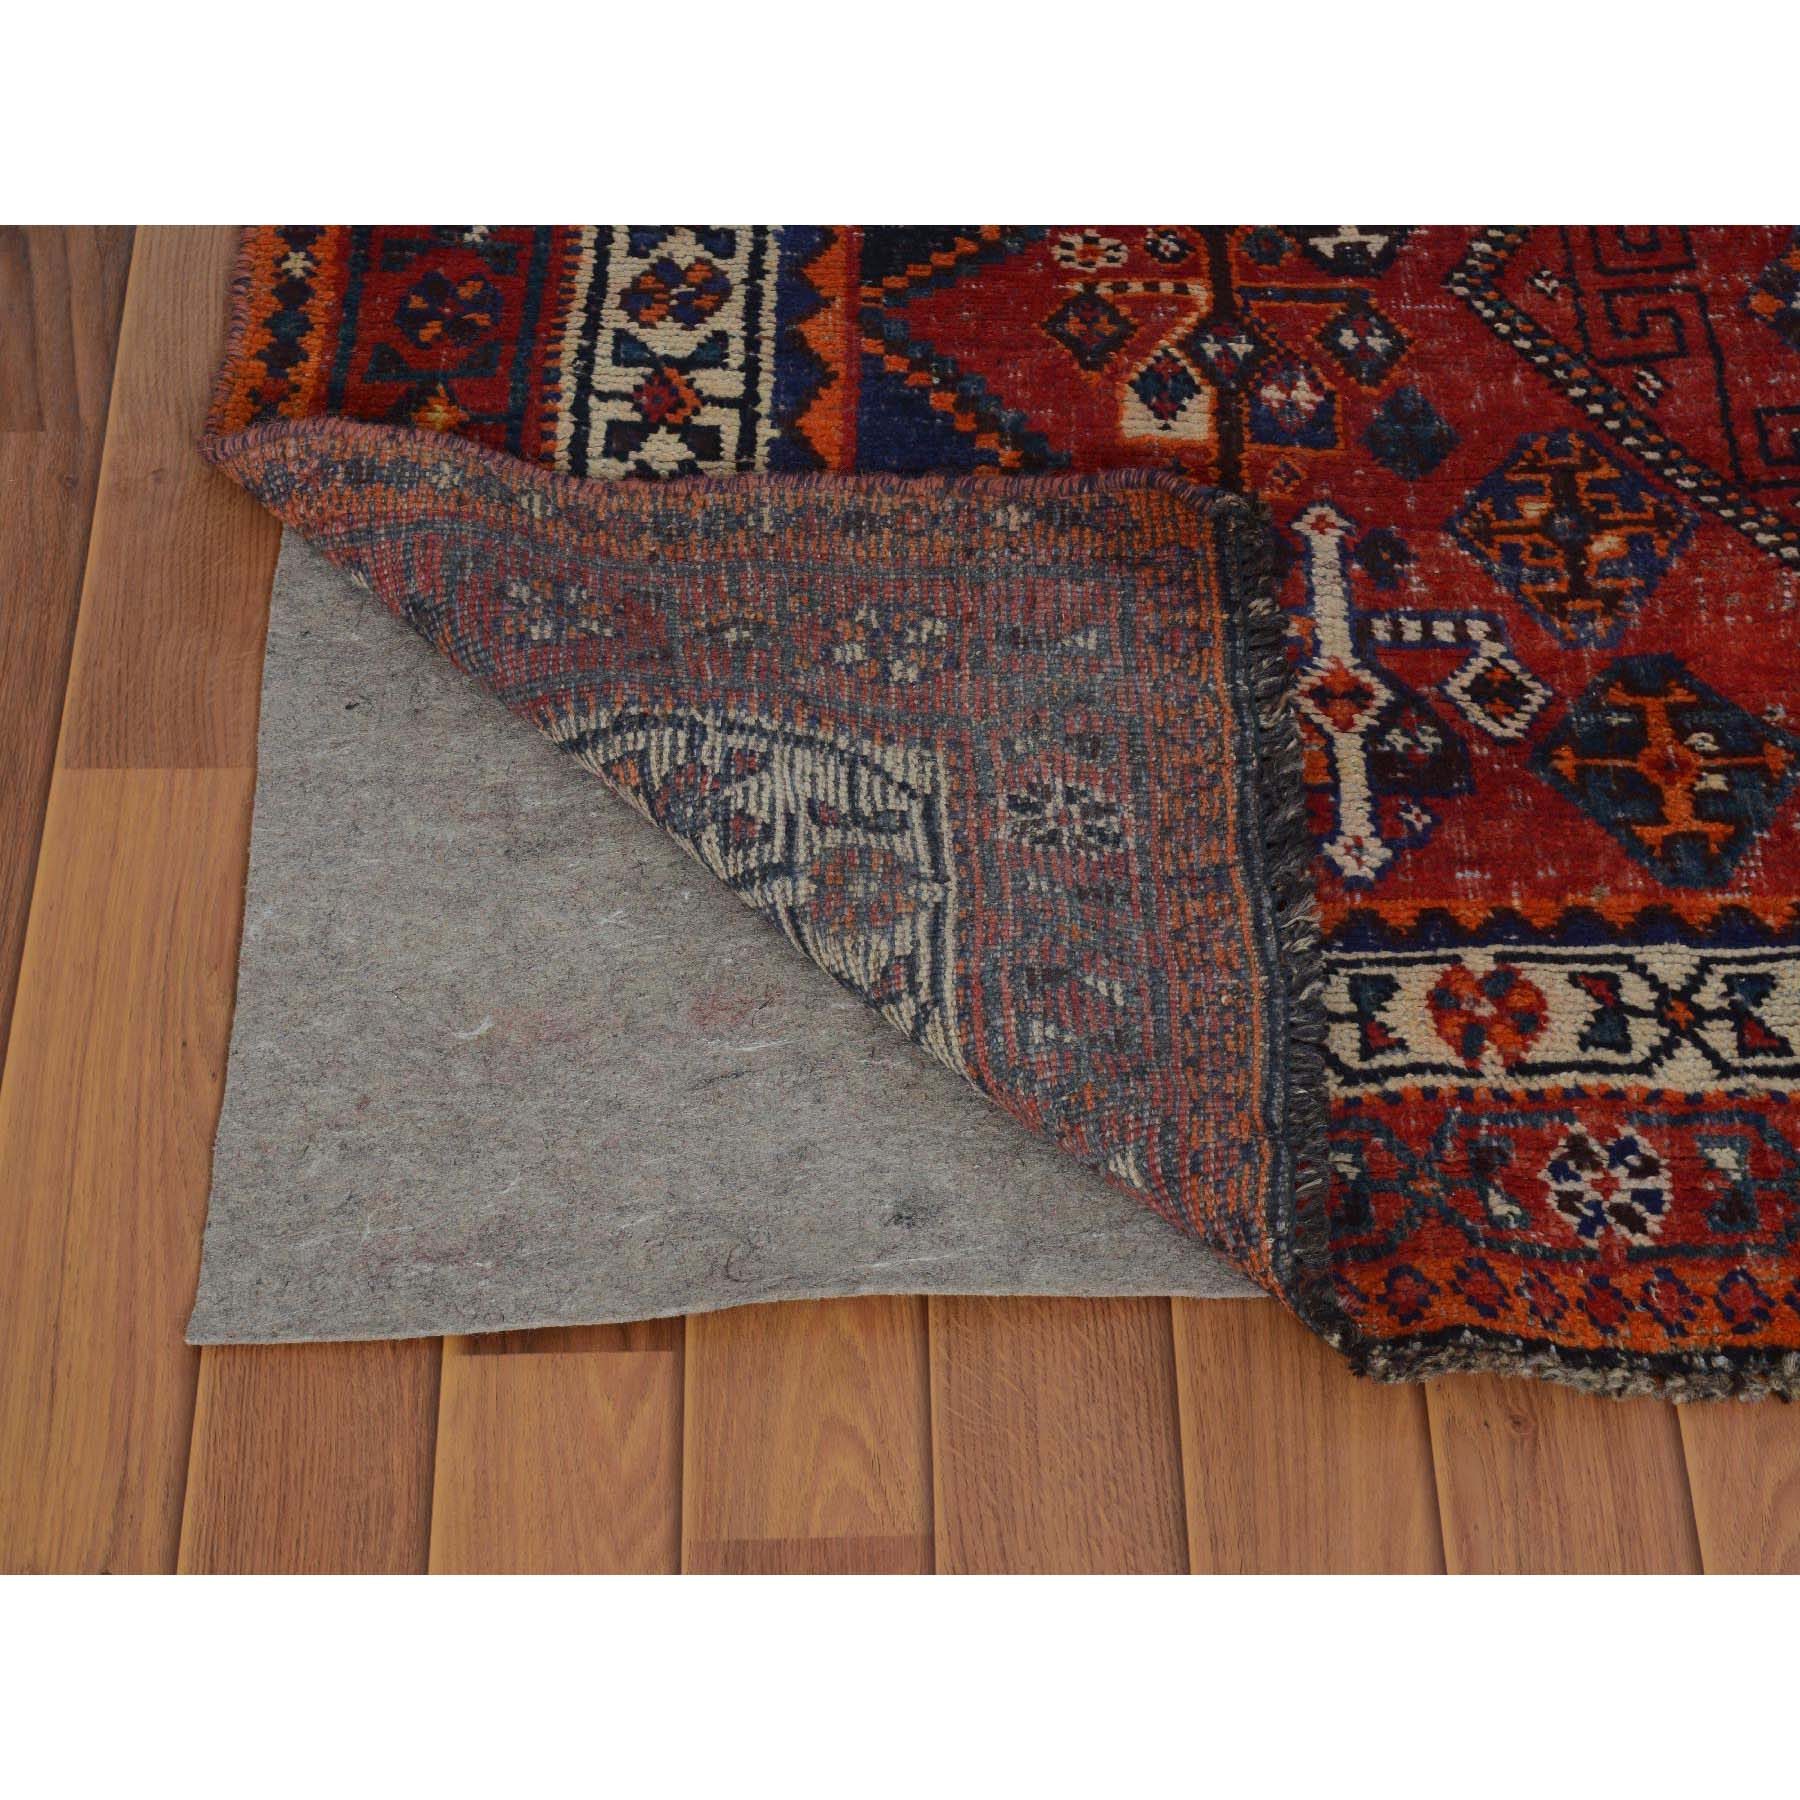 5-2 x7-10  Rust Red Old And Worn Down Persian Qashqai Pure Wool Bohemian Rug 